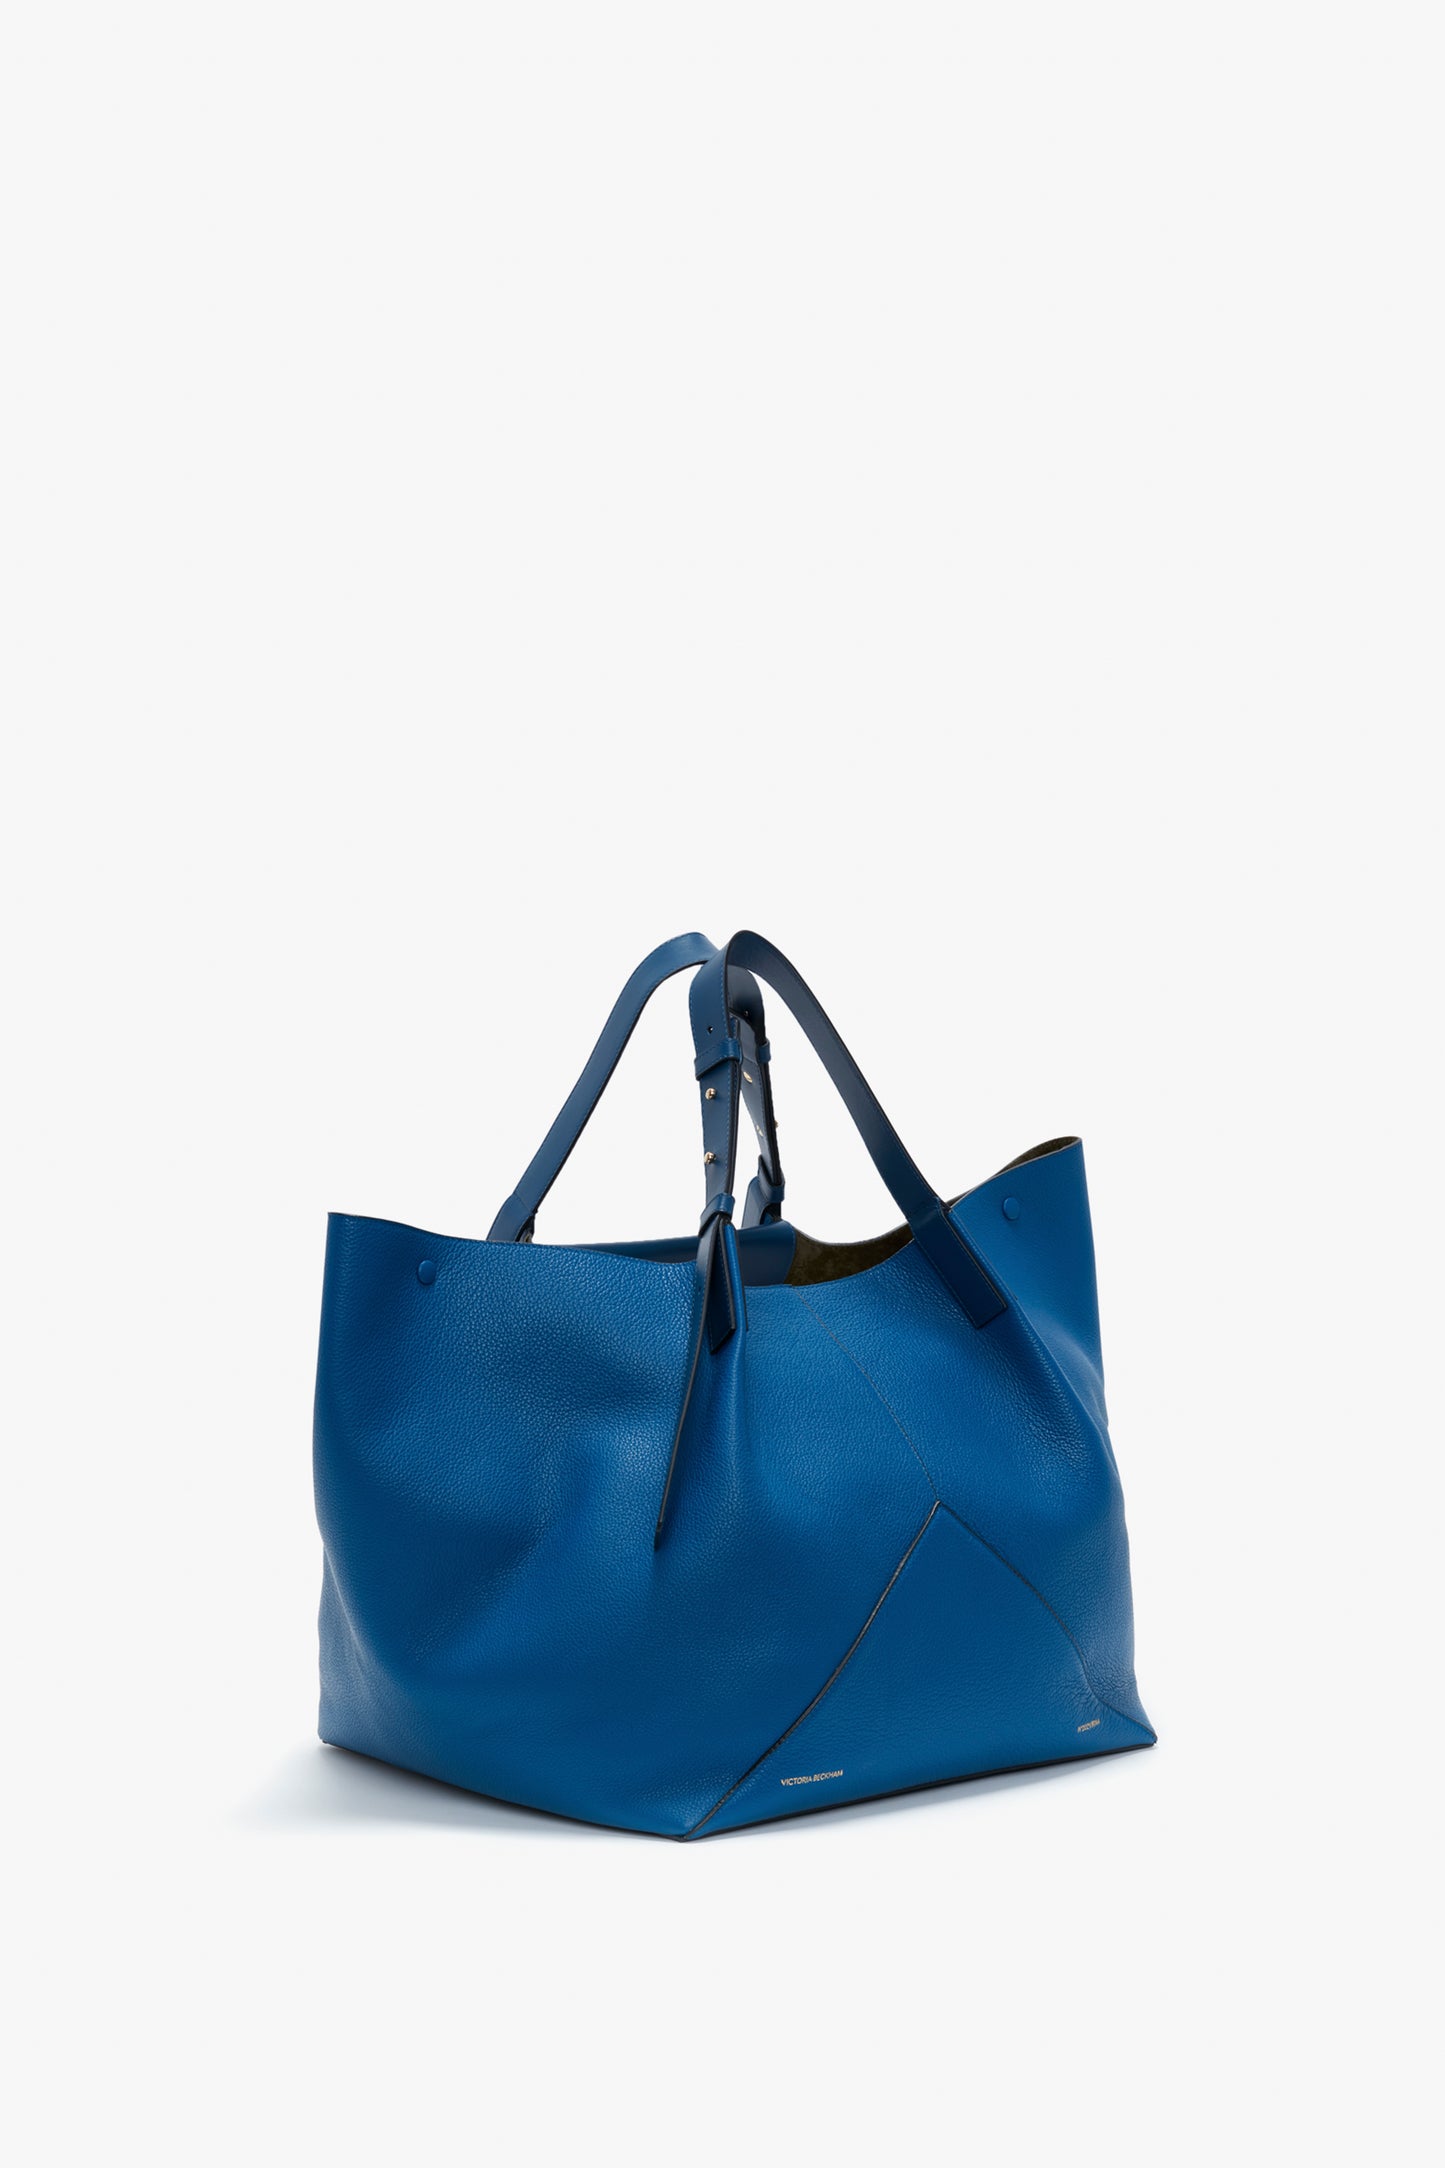 A W11 Medium Tote Bag In Vibrant Blue Leather by Victoria Beckham, featuring double handles, adjustable straps, and a minimalistic design.